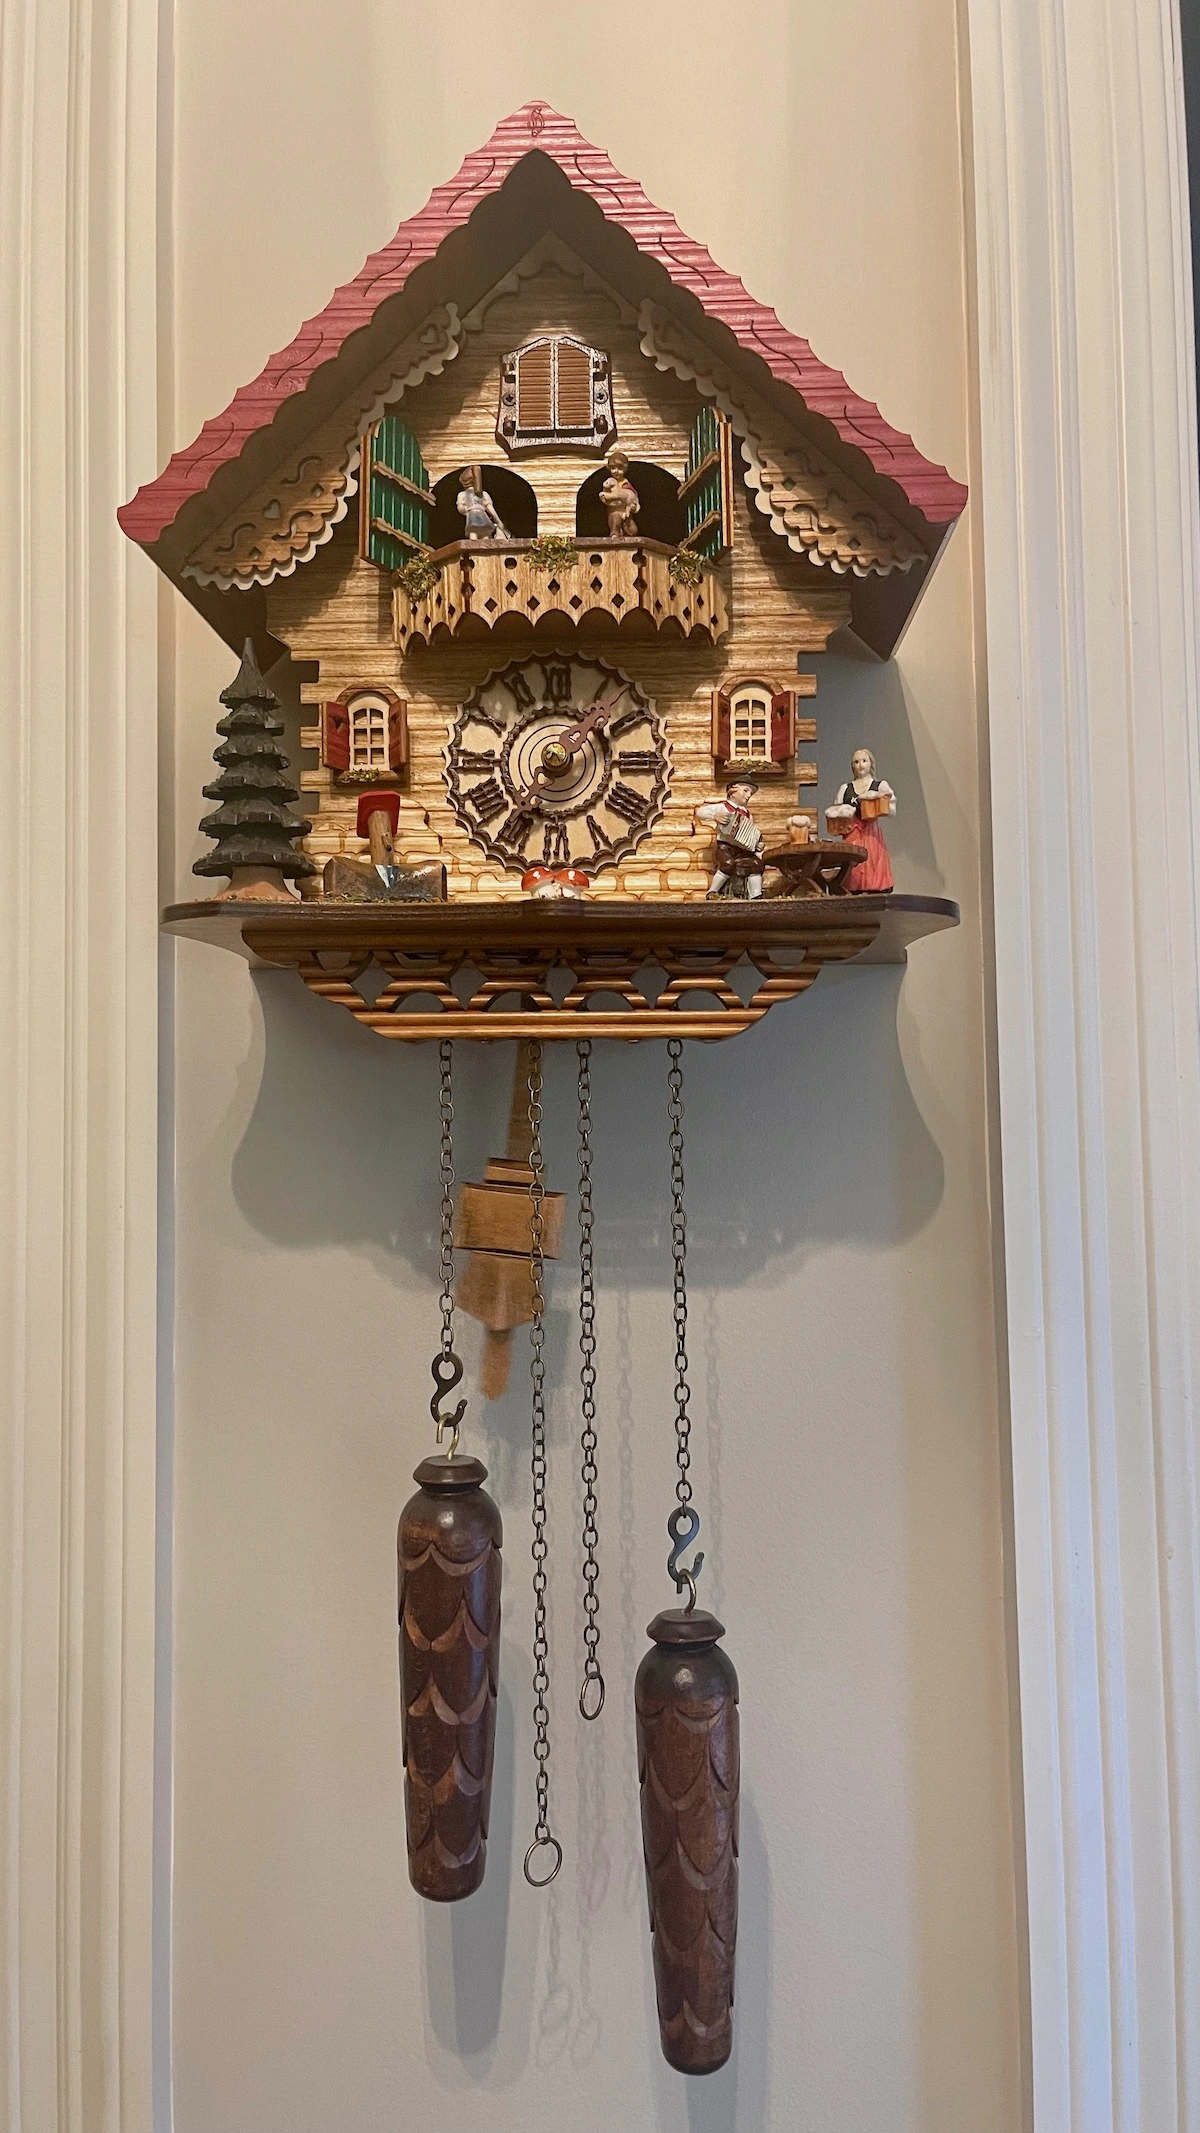 Cuckoo Clock from Black Forest